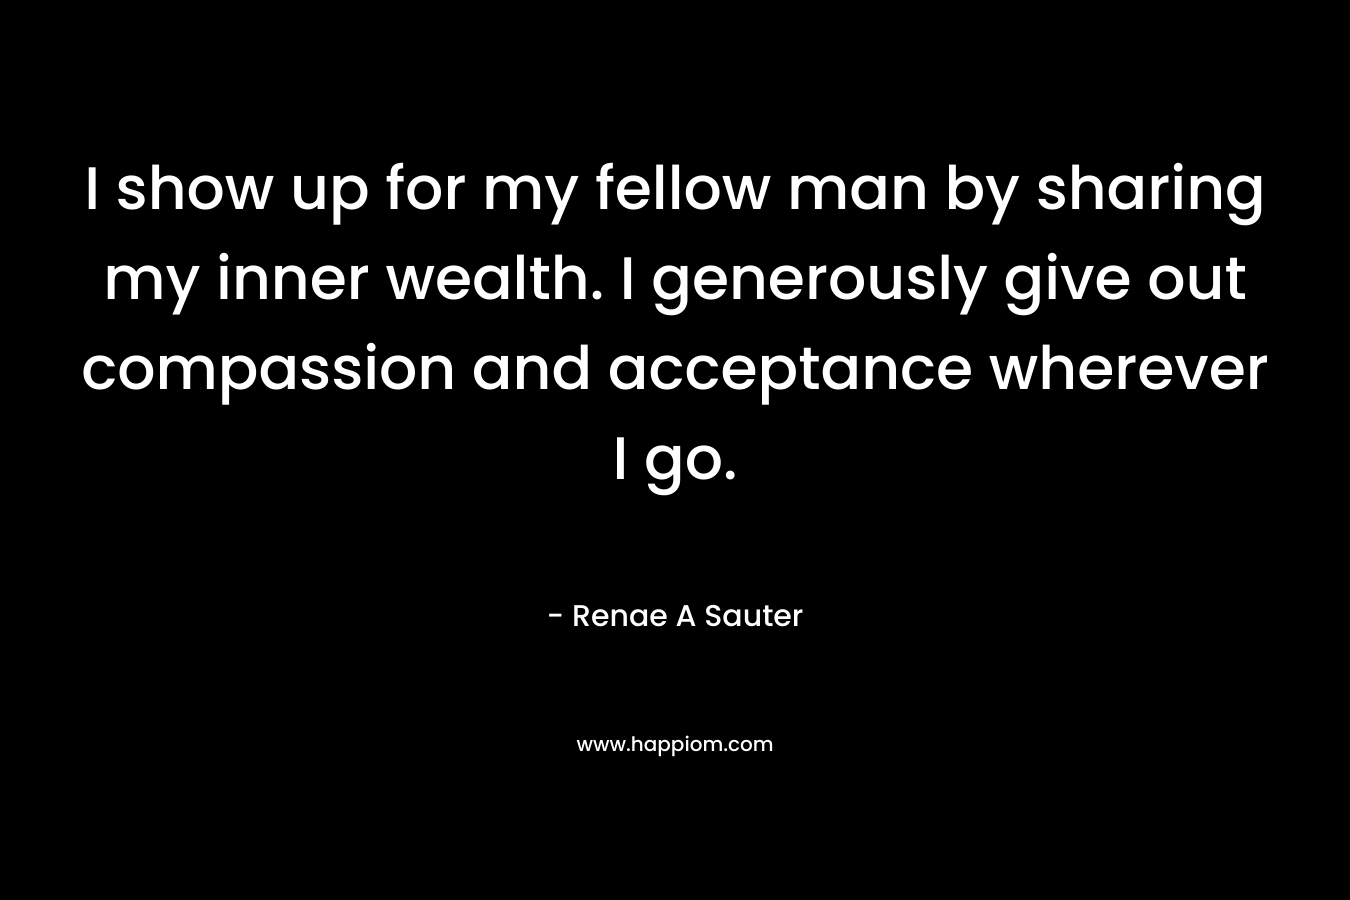 I show up for my fellow man by sharing my inner wealth. I generously give out compassion and acceptance wherever I go.